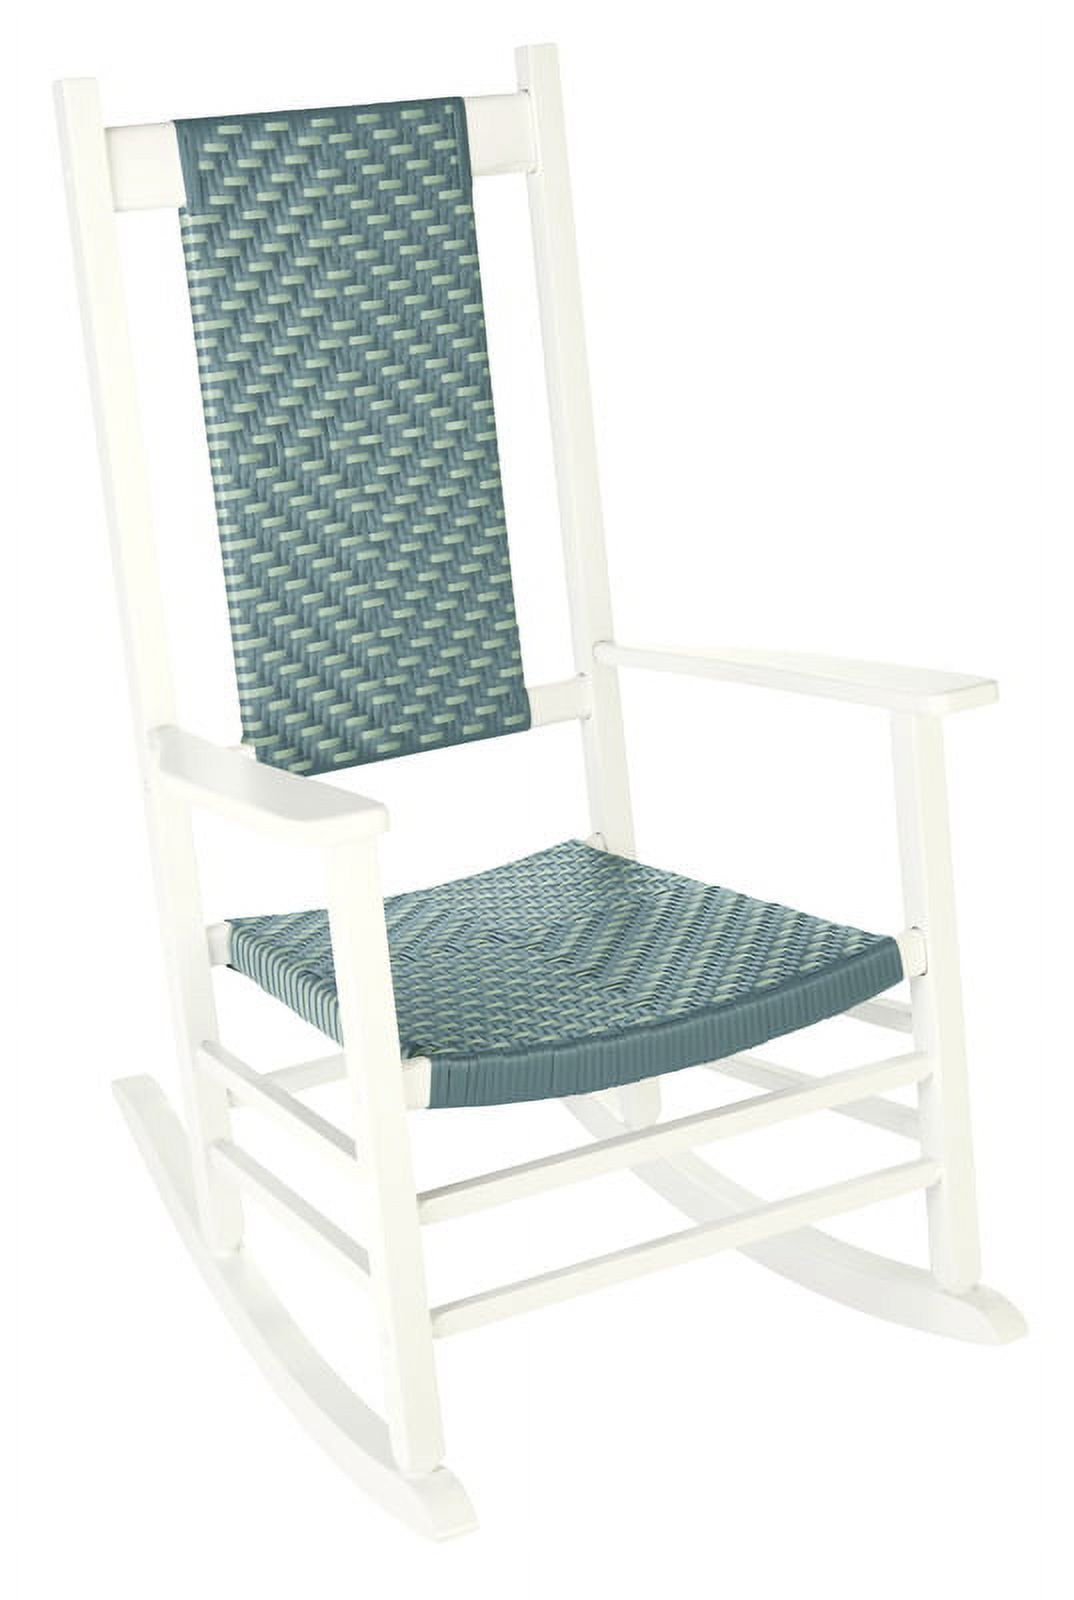 Jack Post Knollwood Rocker With Wicker In White & Gray - image 1 of 3